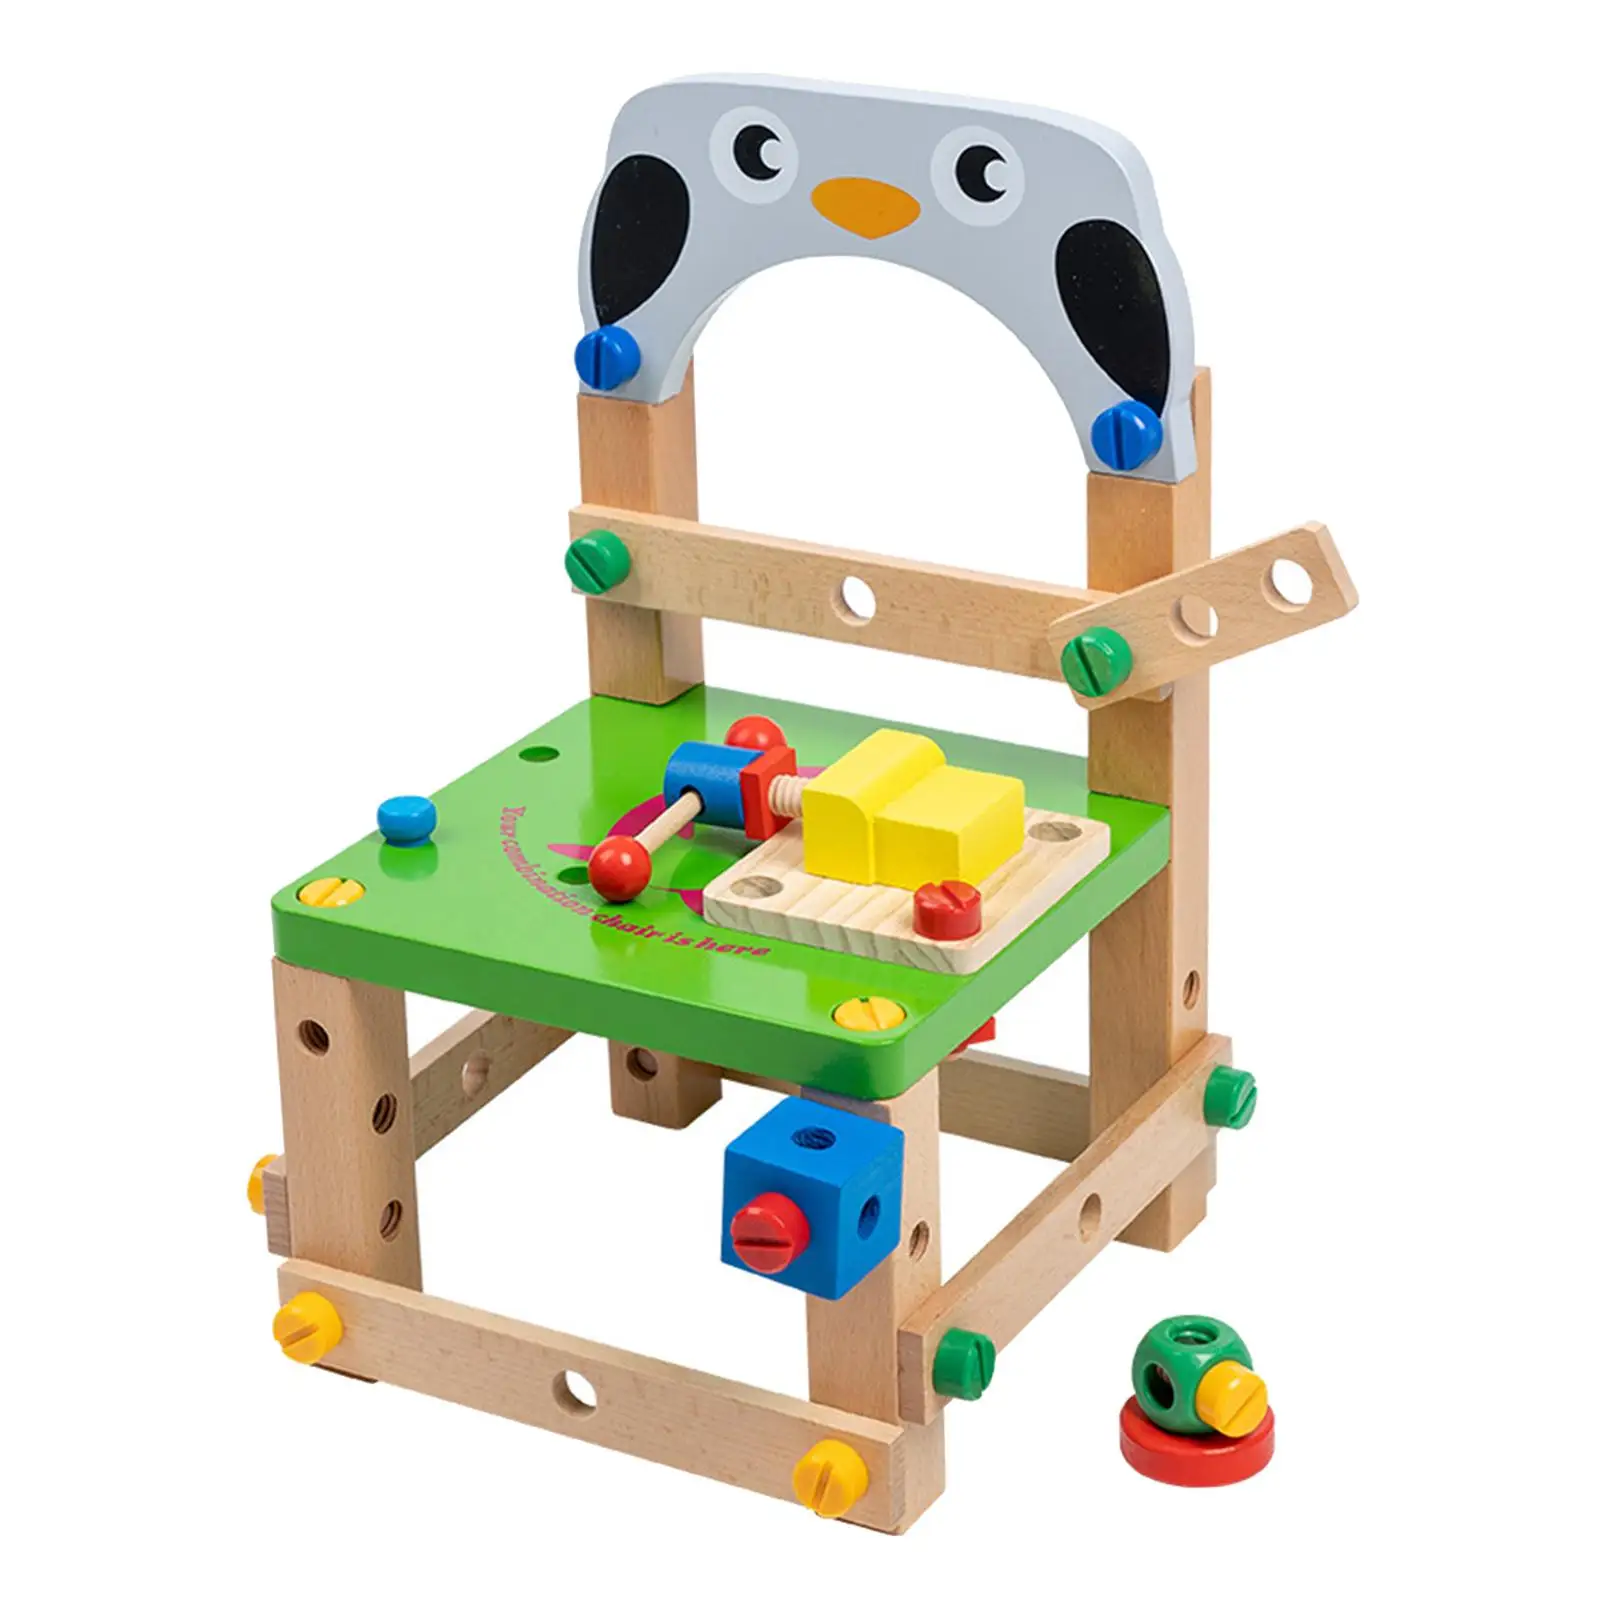 Creativity Build Your Chair Imagination Toy Set Learning Toy DIY Wooden Multifunctional Chair for Toddlers Children Kids